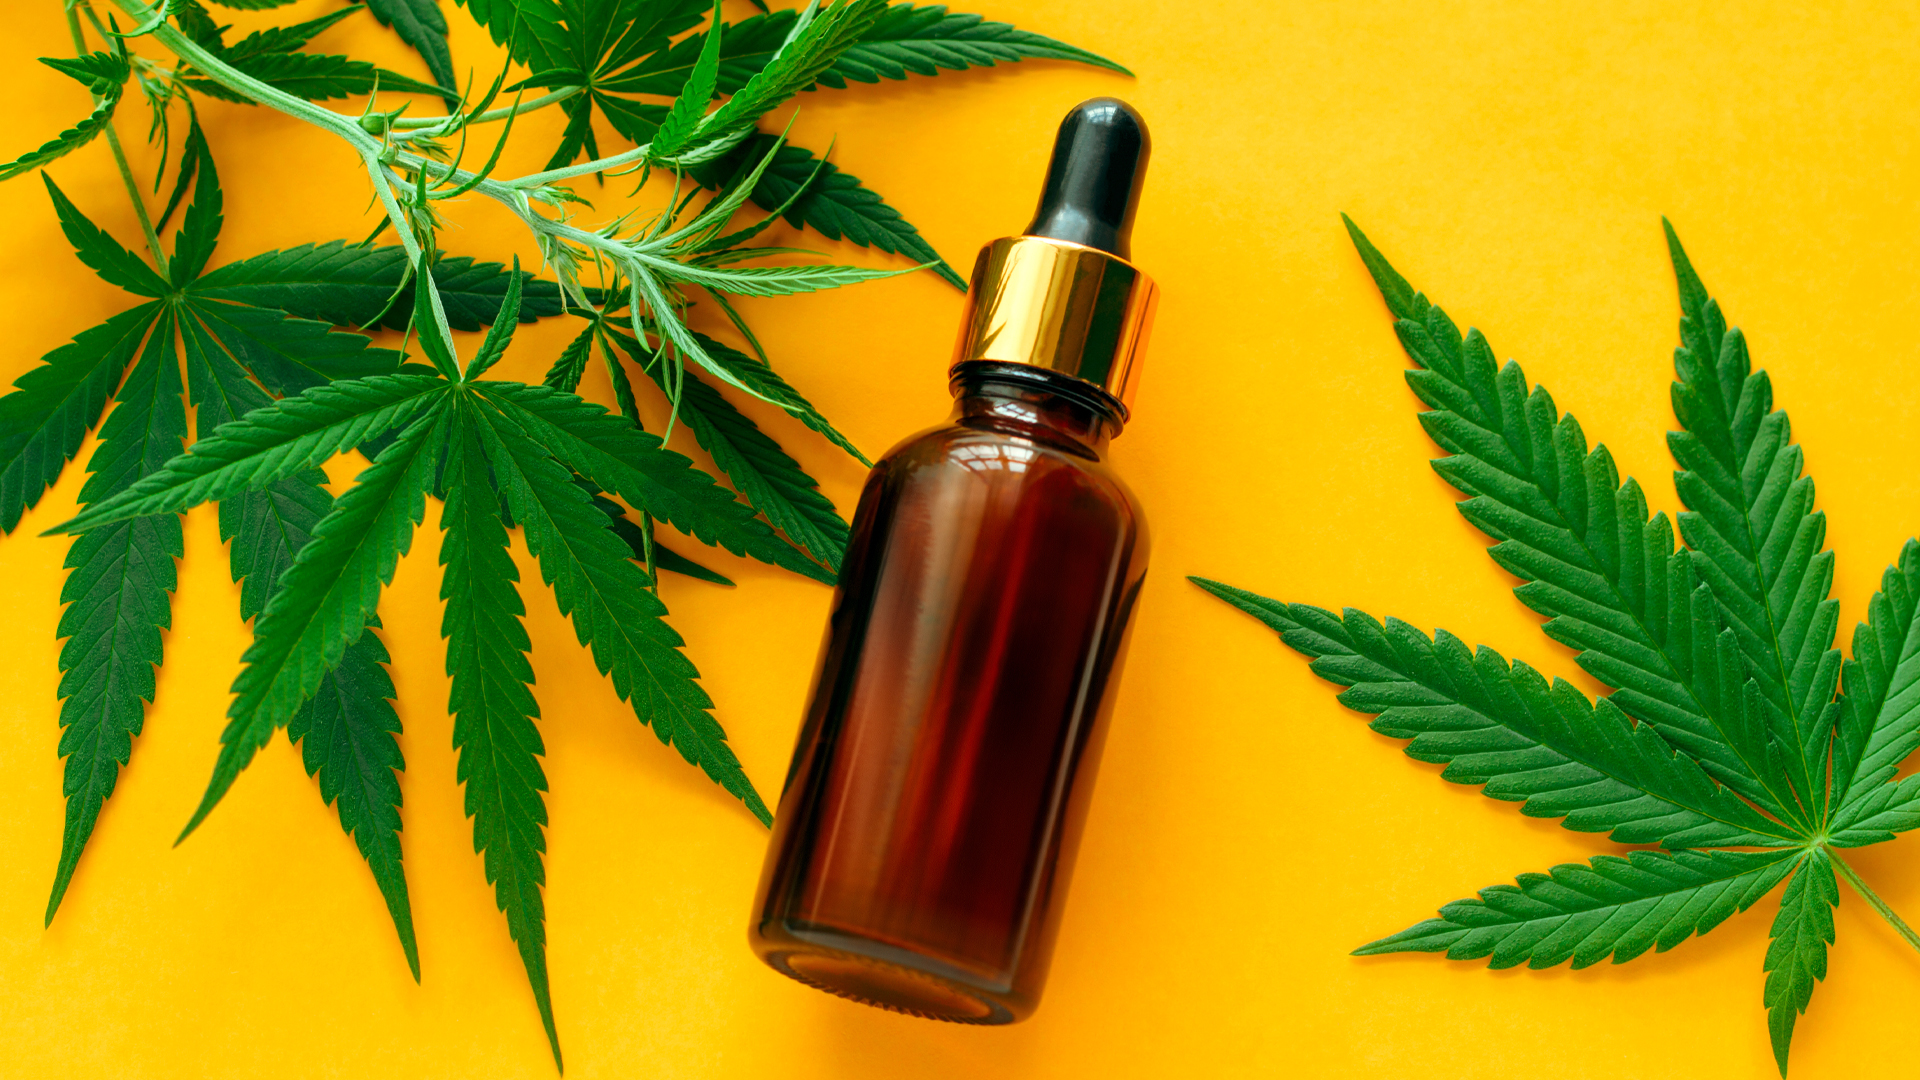 What are the medical benefits of CBD?